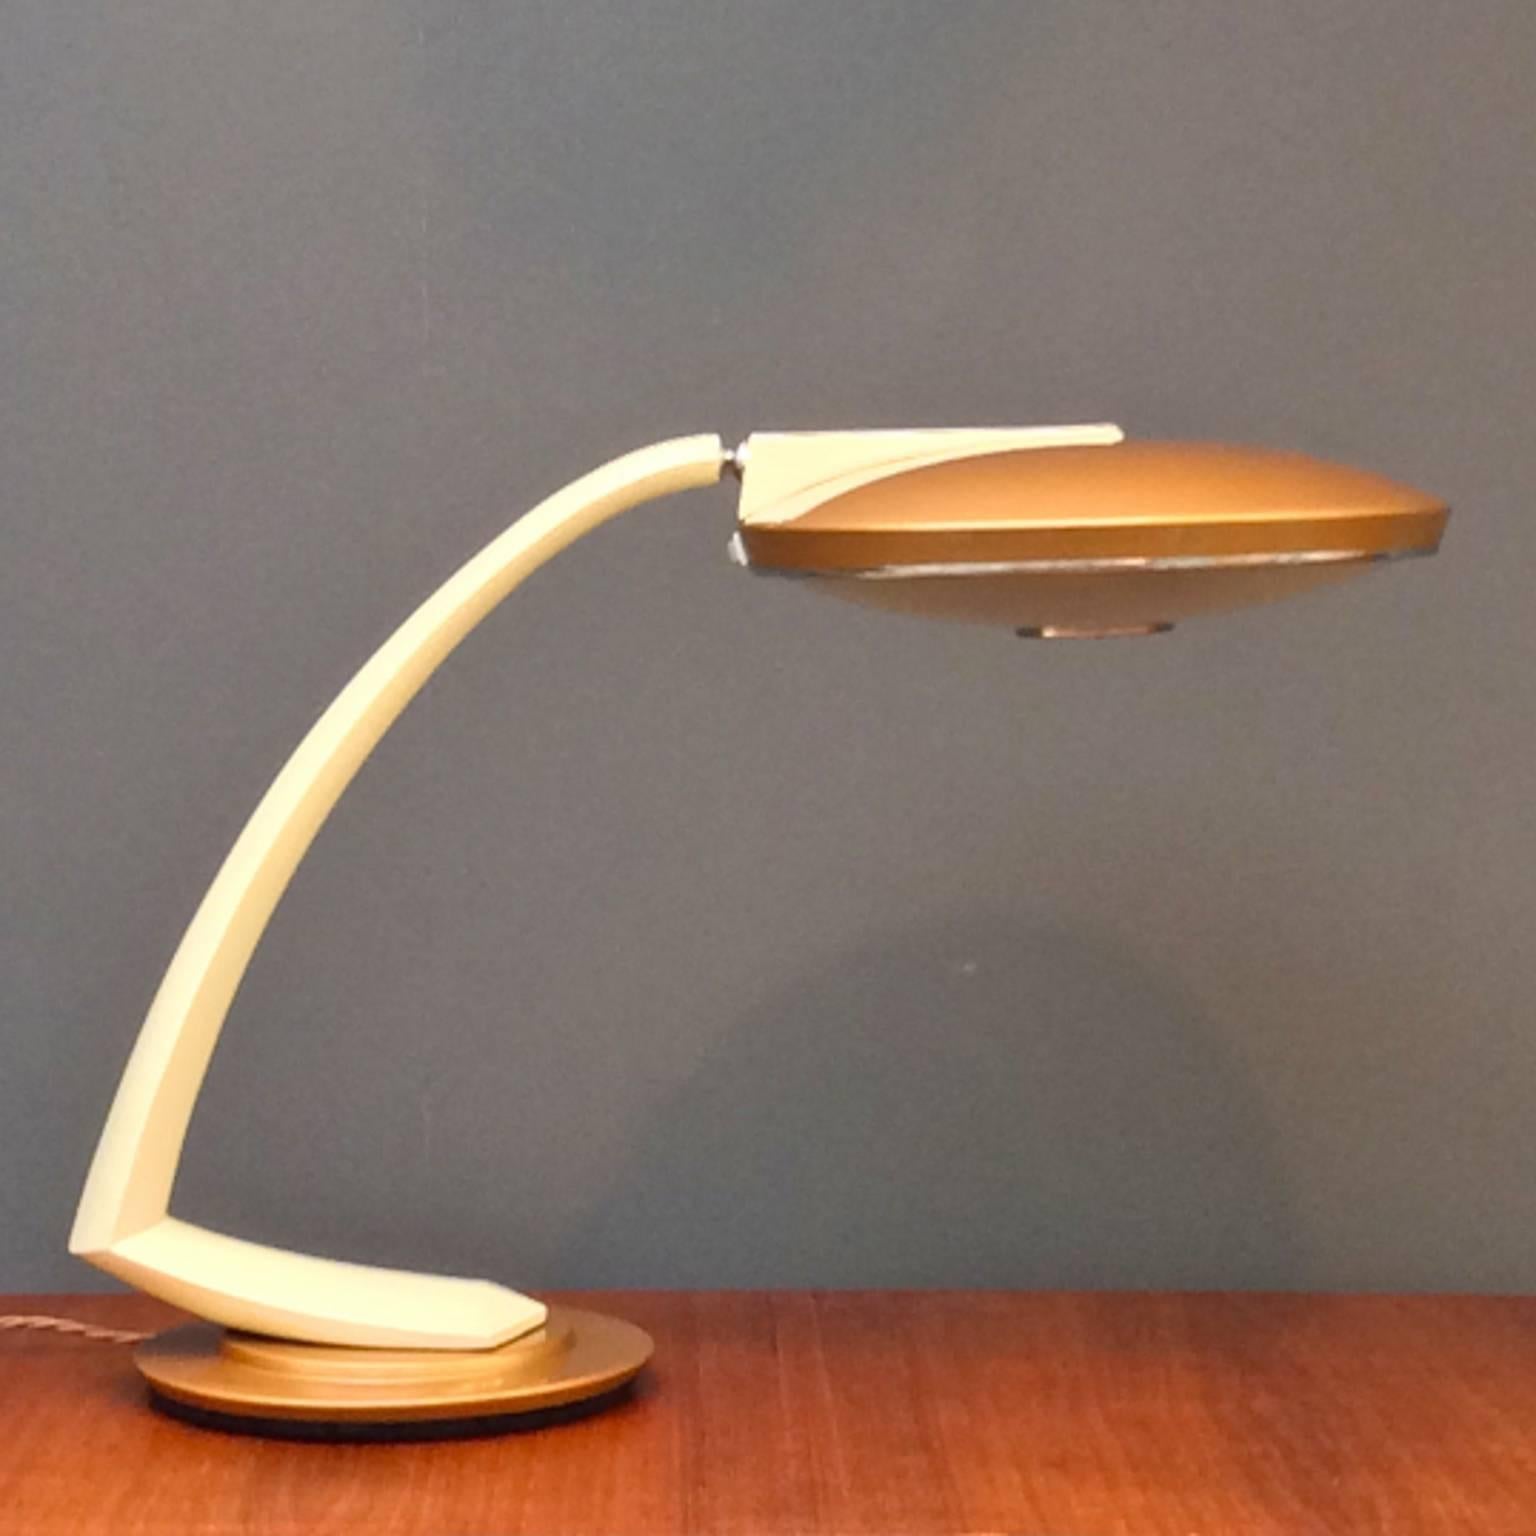 Stylish and architectural desk lamp by Fase of Madrid, Spain, 1960s.

The lamp has a metal body finished in shades of cream and tan, with flying saucer style shade and original glass diffuser. The position of the shade is adjustable through the